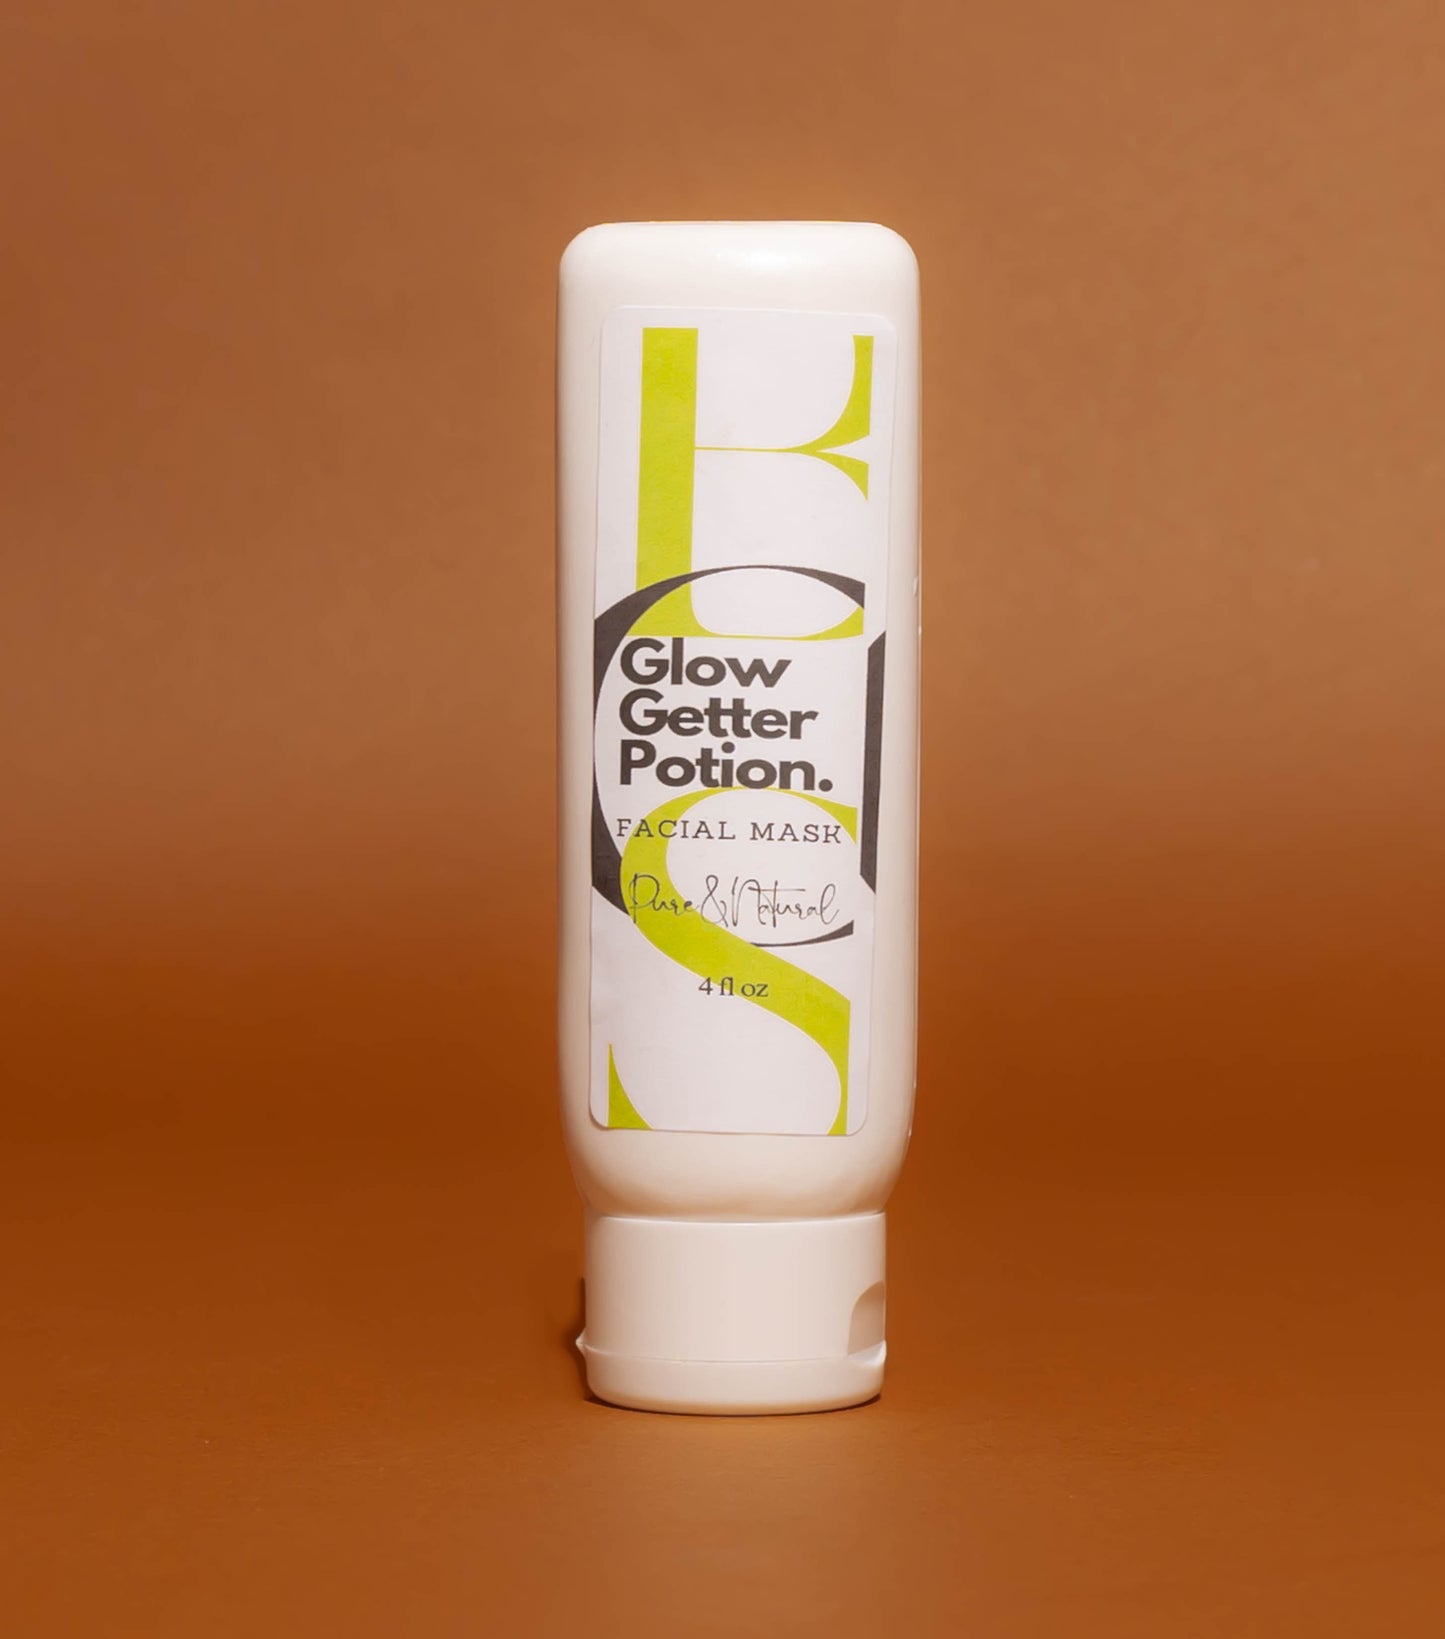 Glow Getter Potion Facial Mask